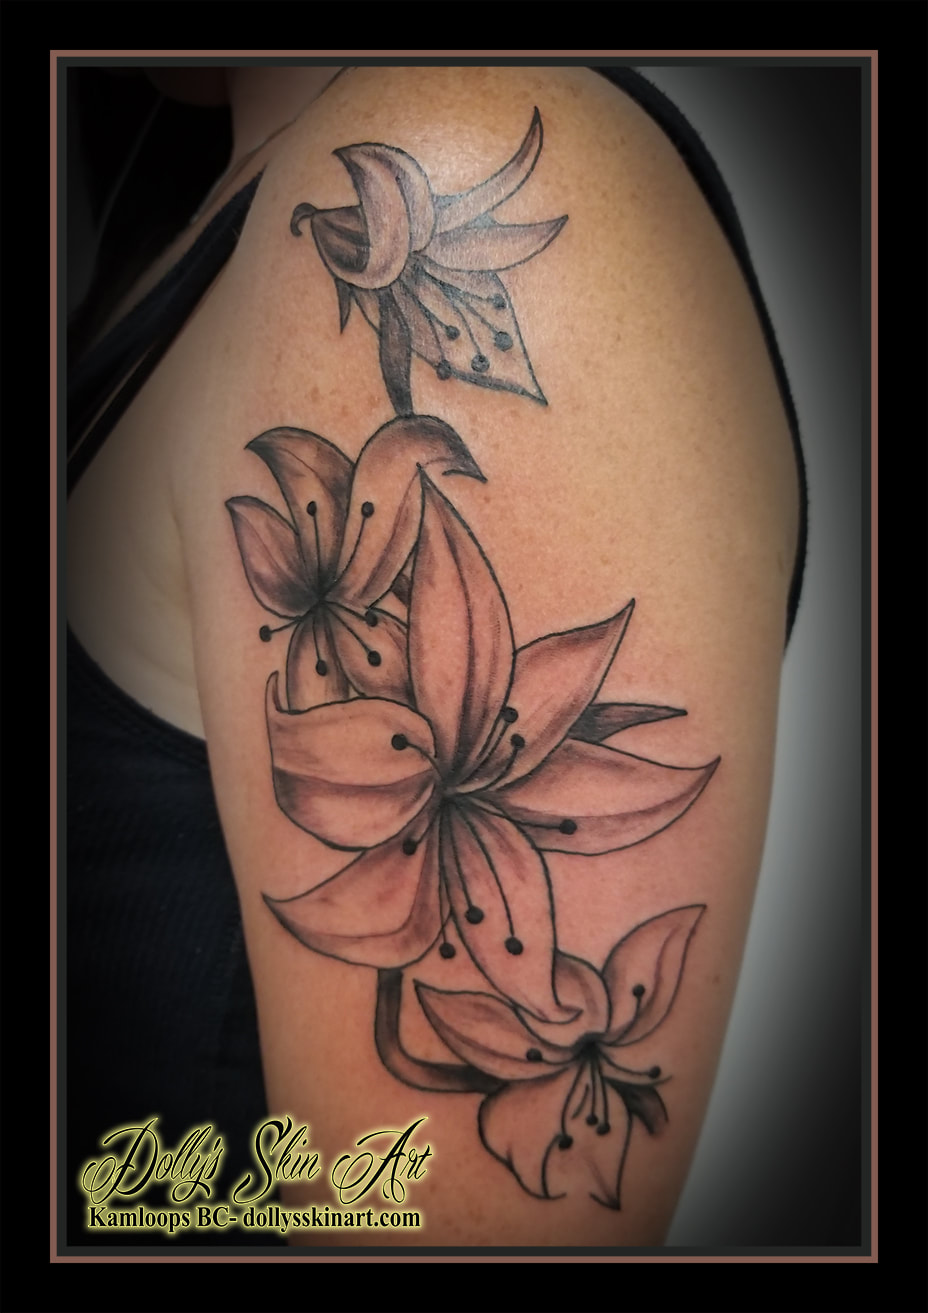 Shiloh's black and grey lilies - Dolly's Skin Art Tattoo Kamloops BC